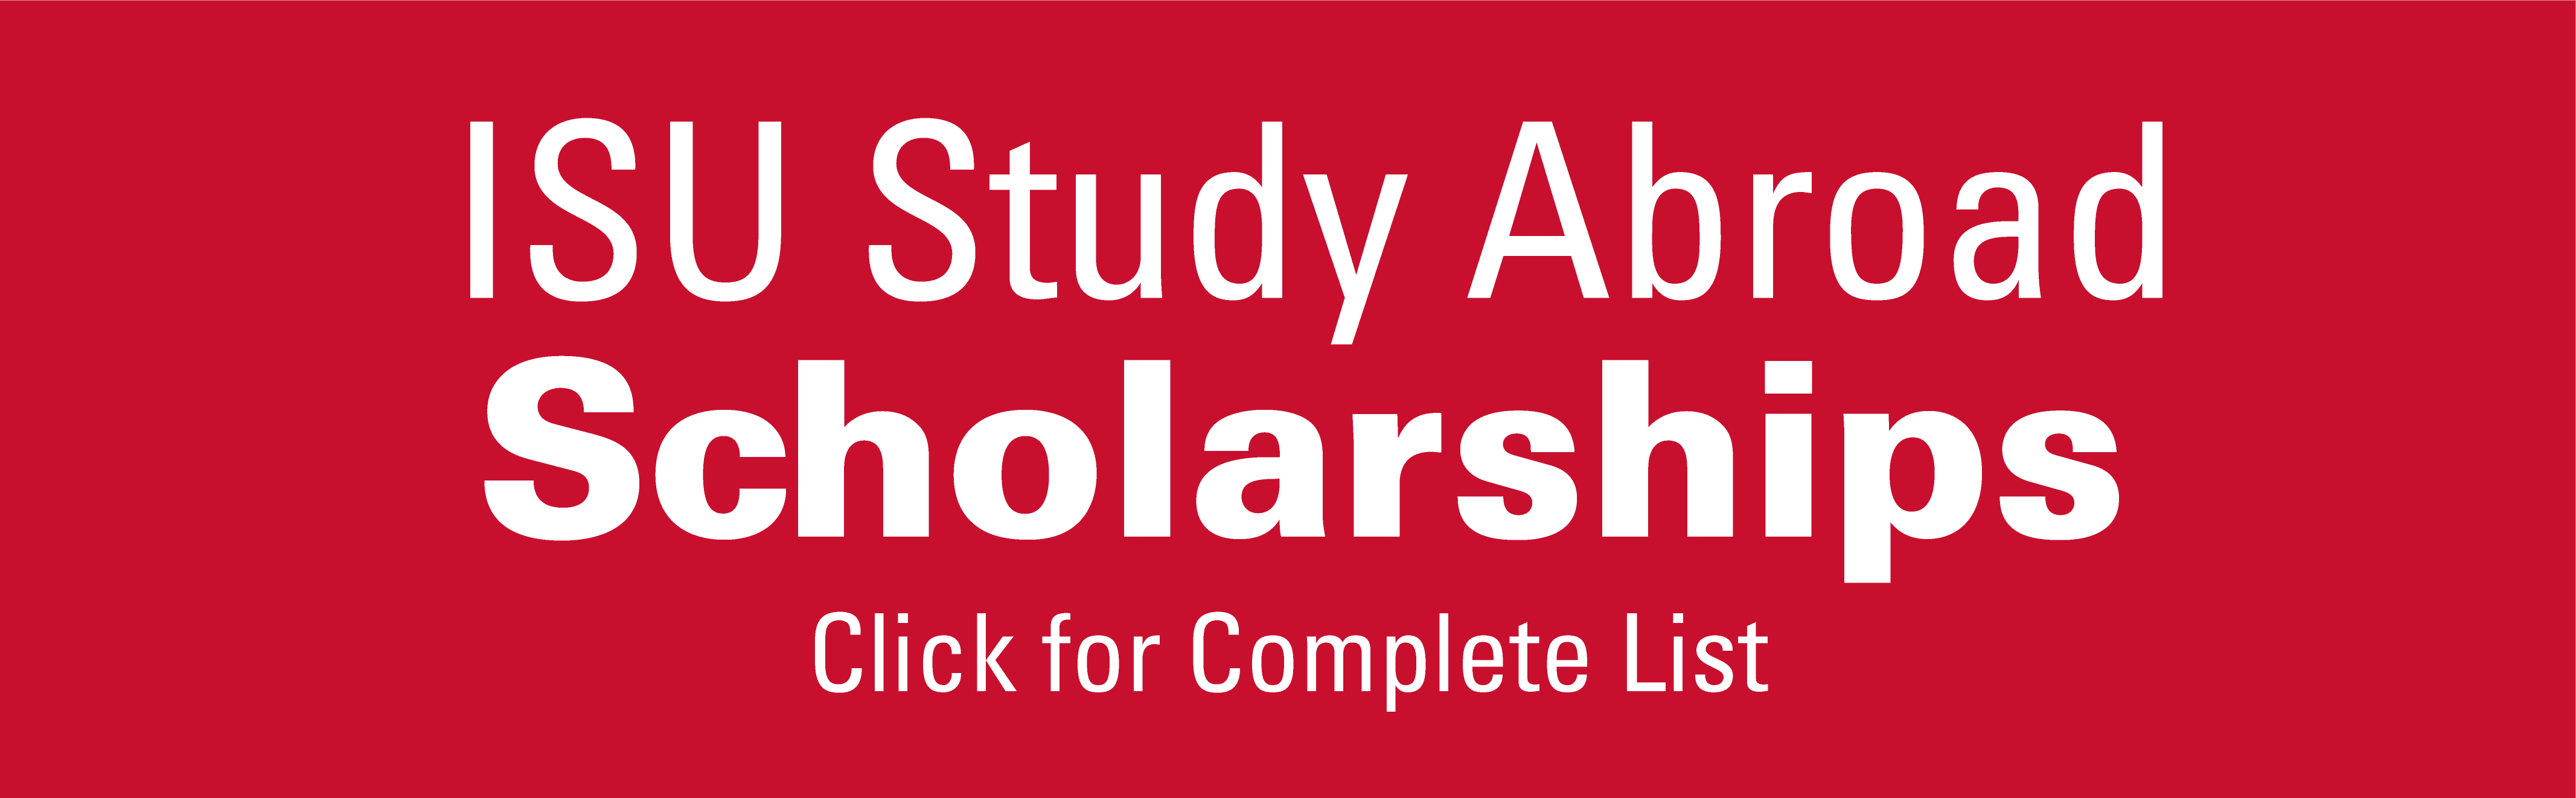 Click here for a list of ISU study abroad scholarships